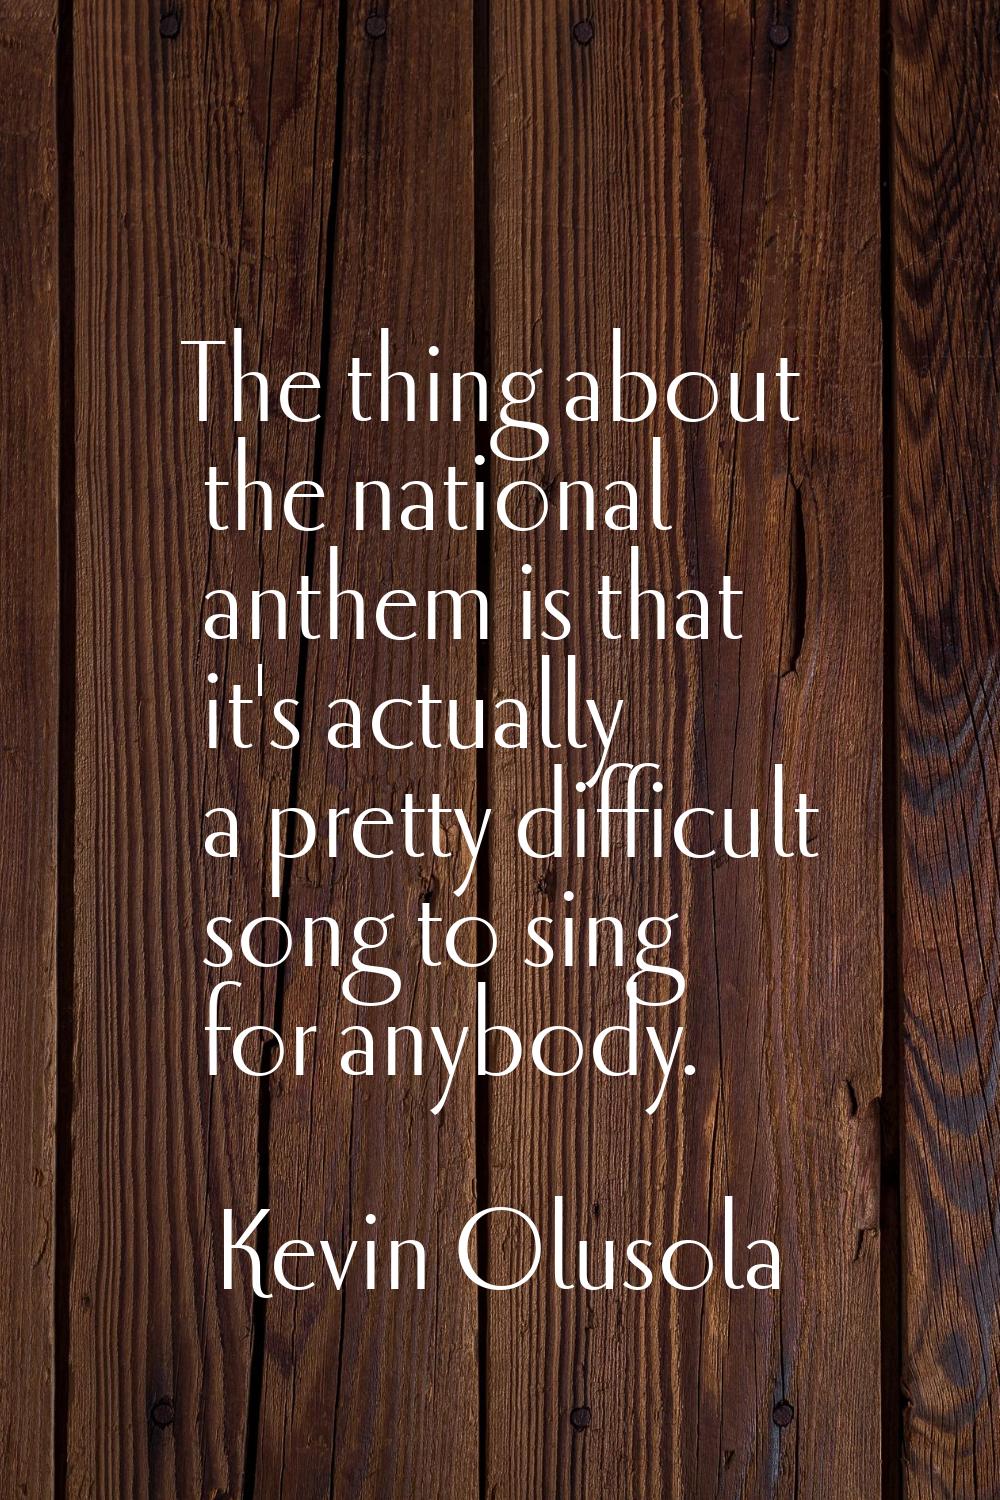 The thing about the national anthem is that it's actually a pretty difficult song to sing for anybo